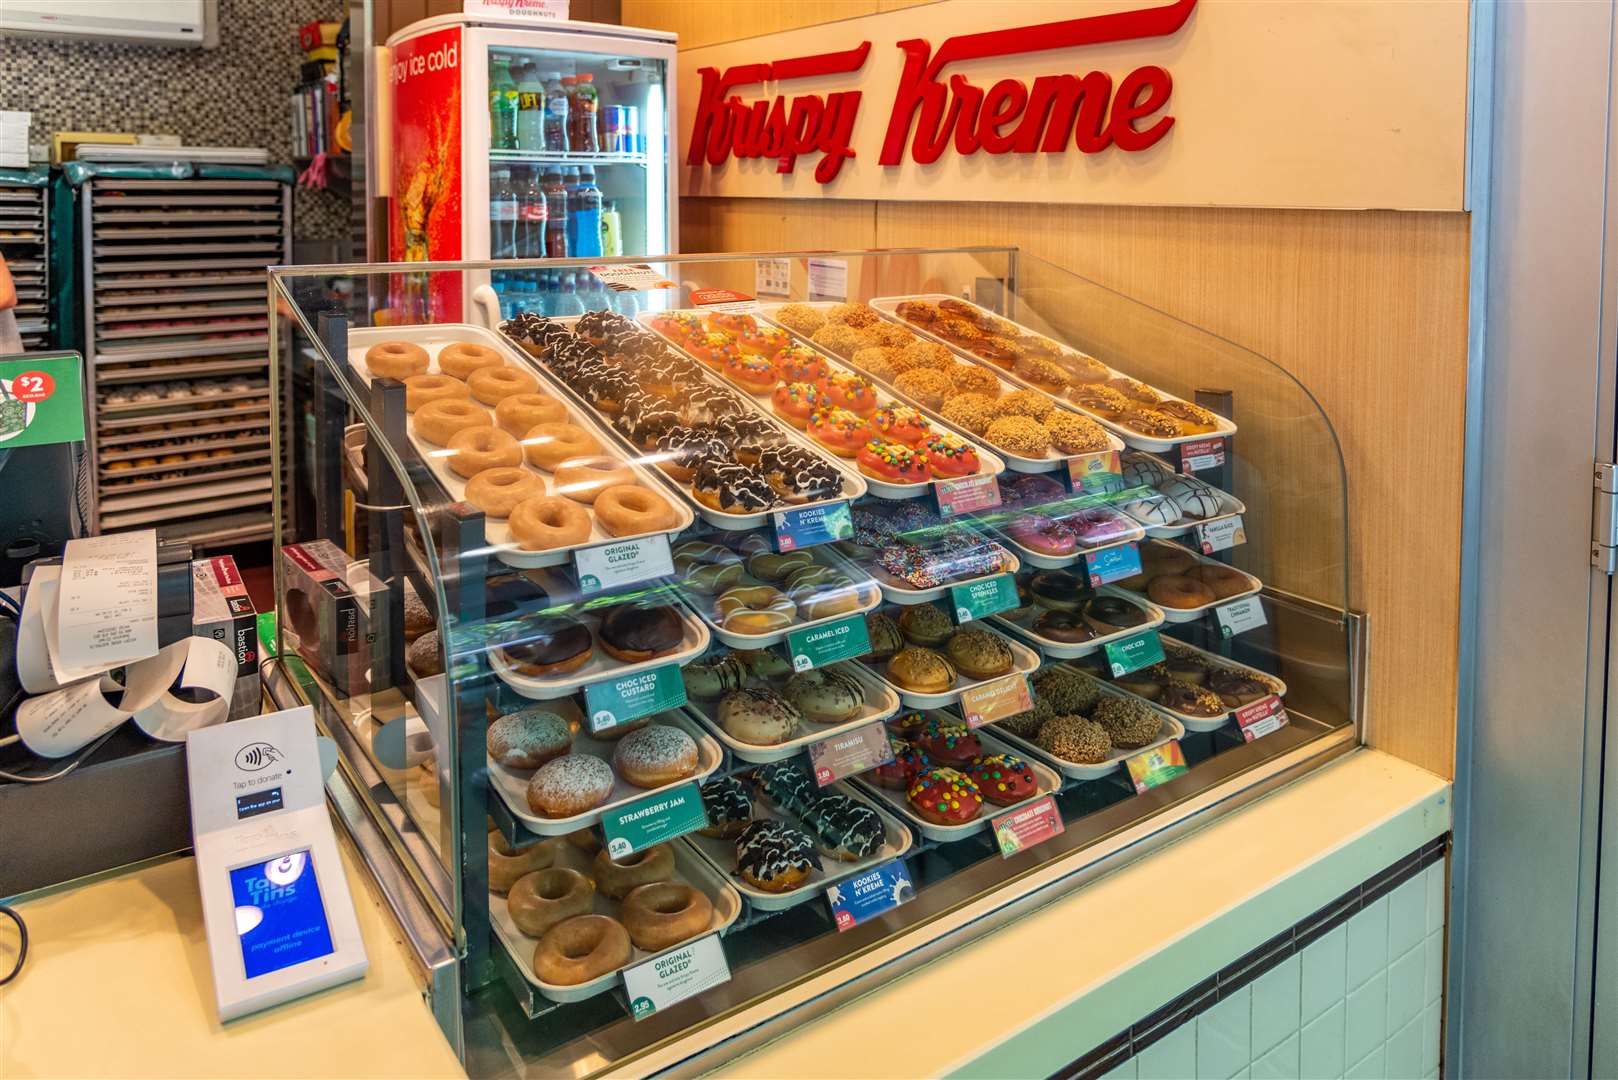 A new Krispy Kreme counter is understood to be opening in Inverness.